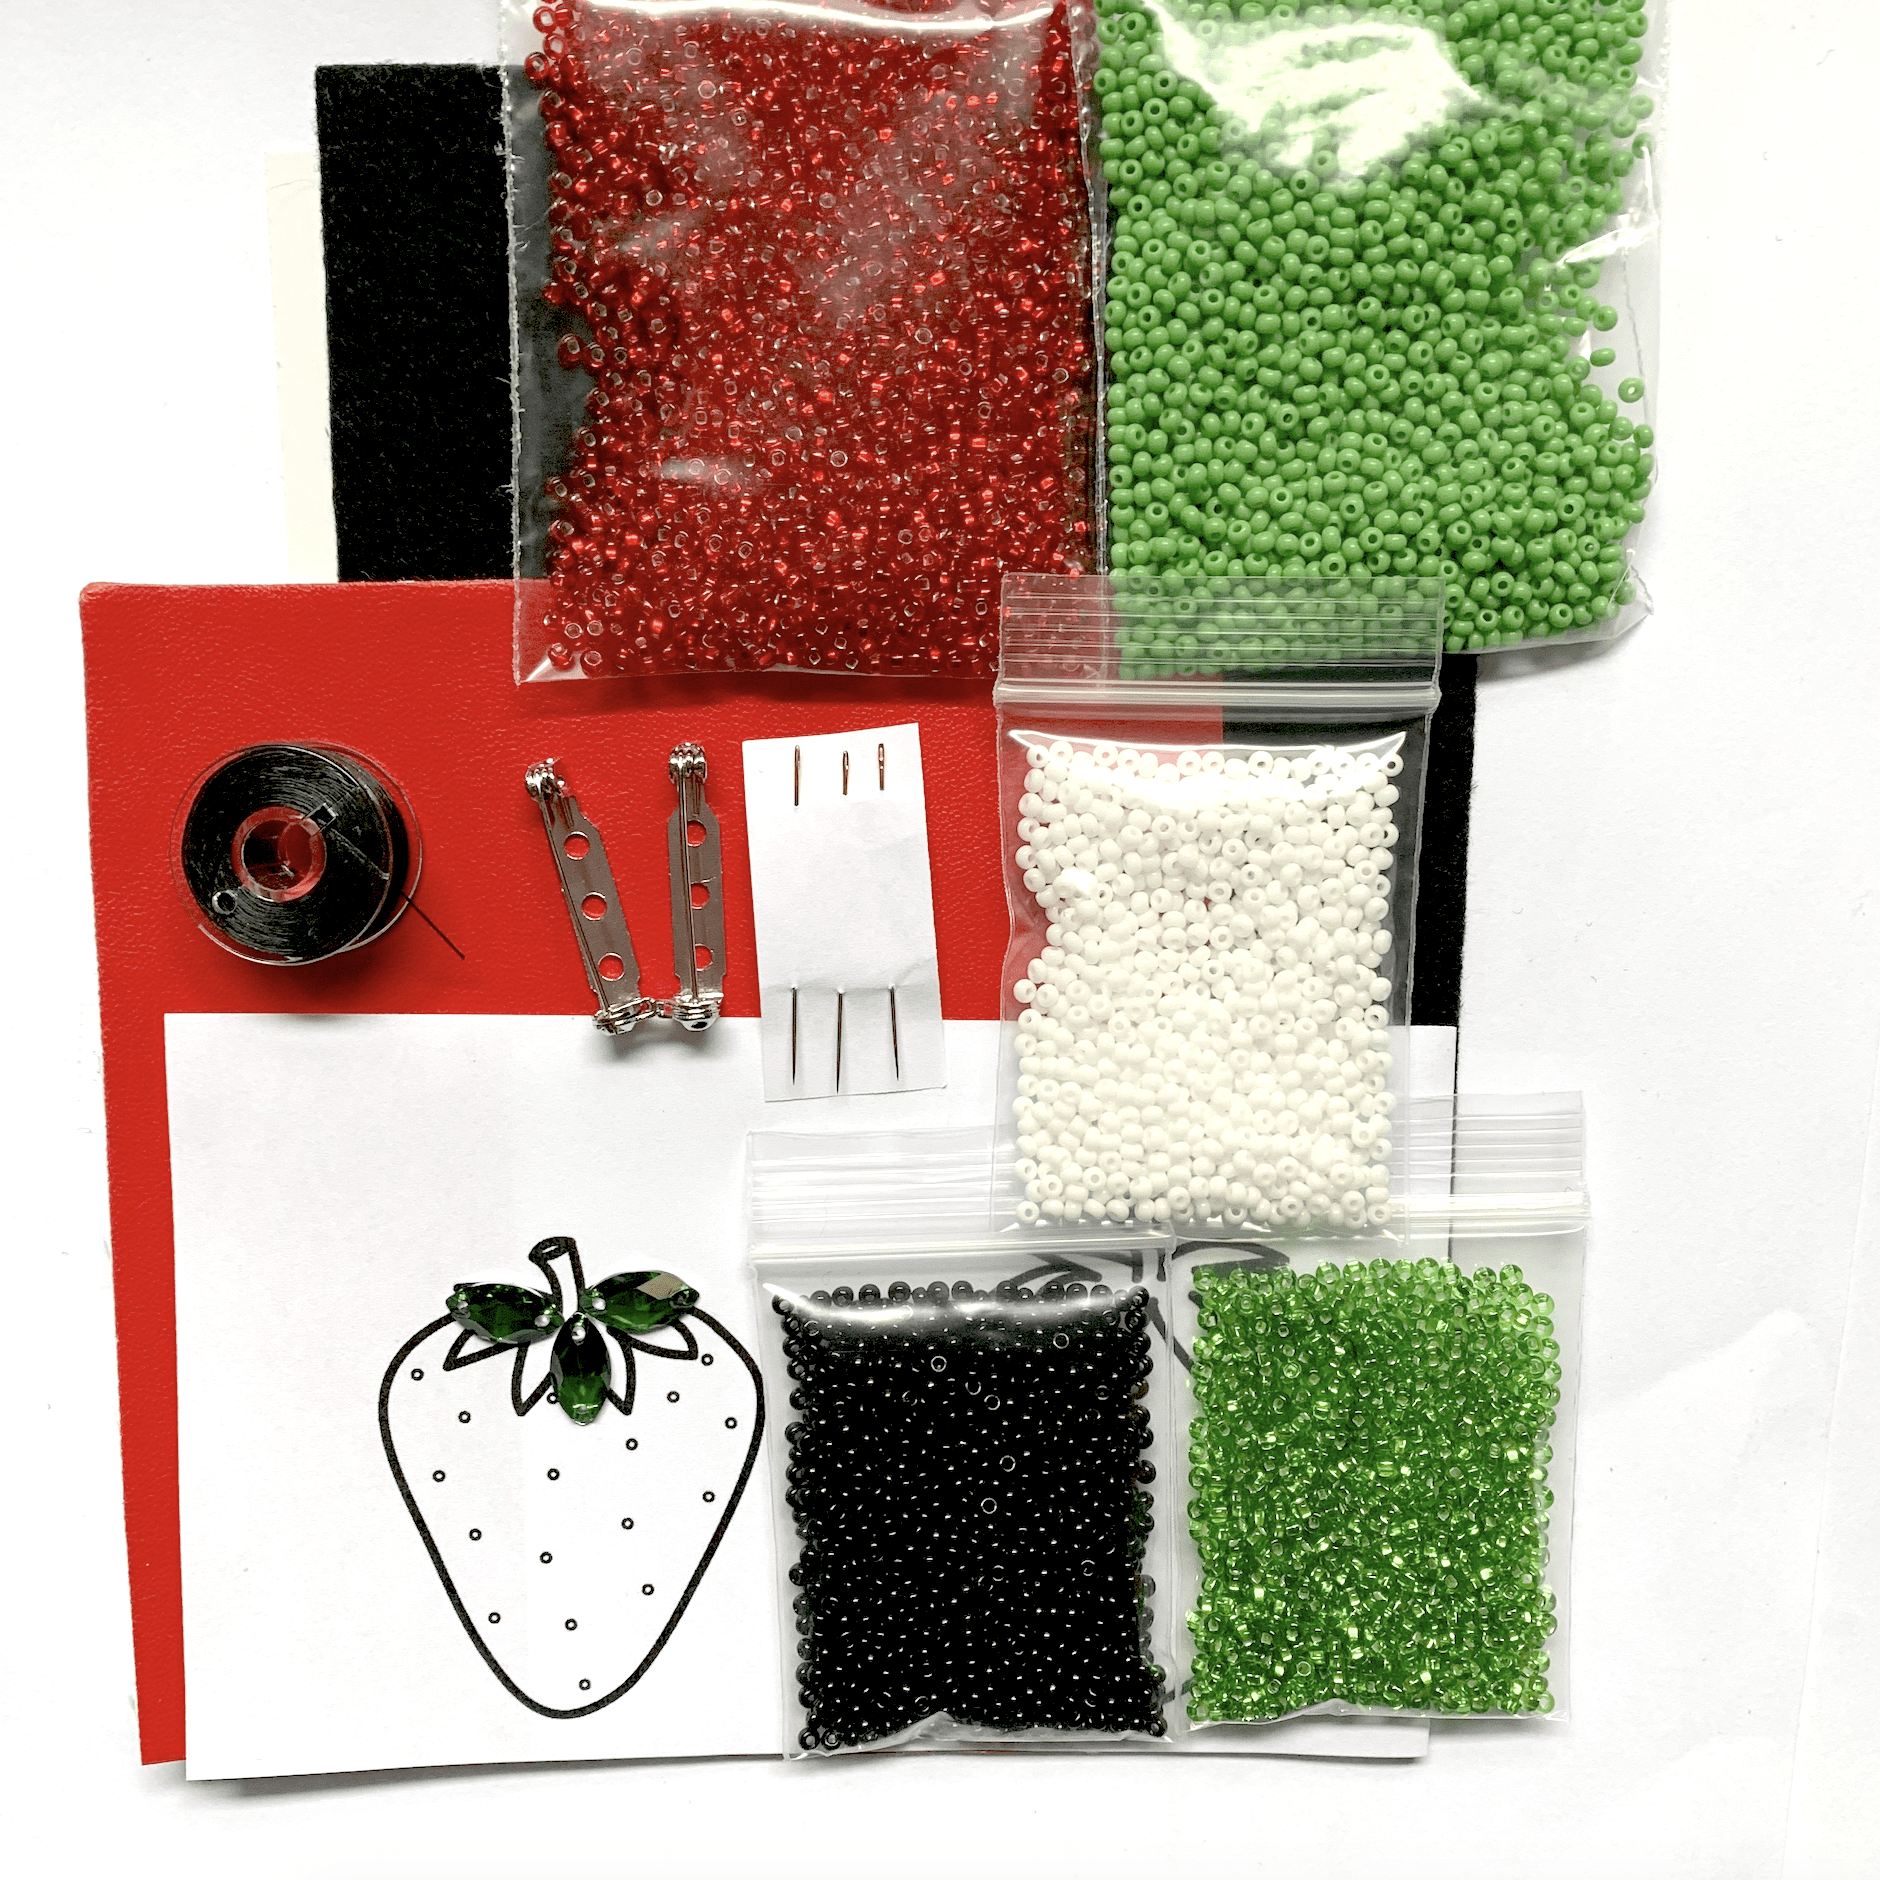 Sundaylace Creations & Bling Promotions Strawberry Pin: New Beader Starter Kits with pattern